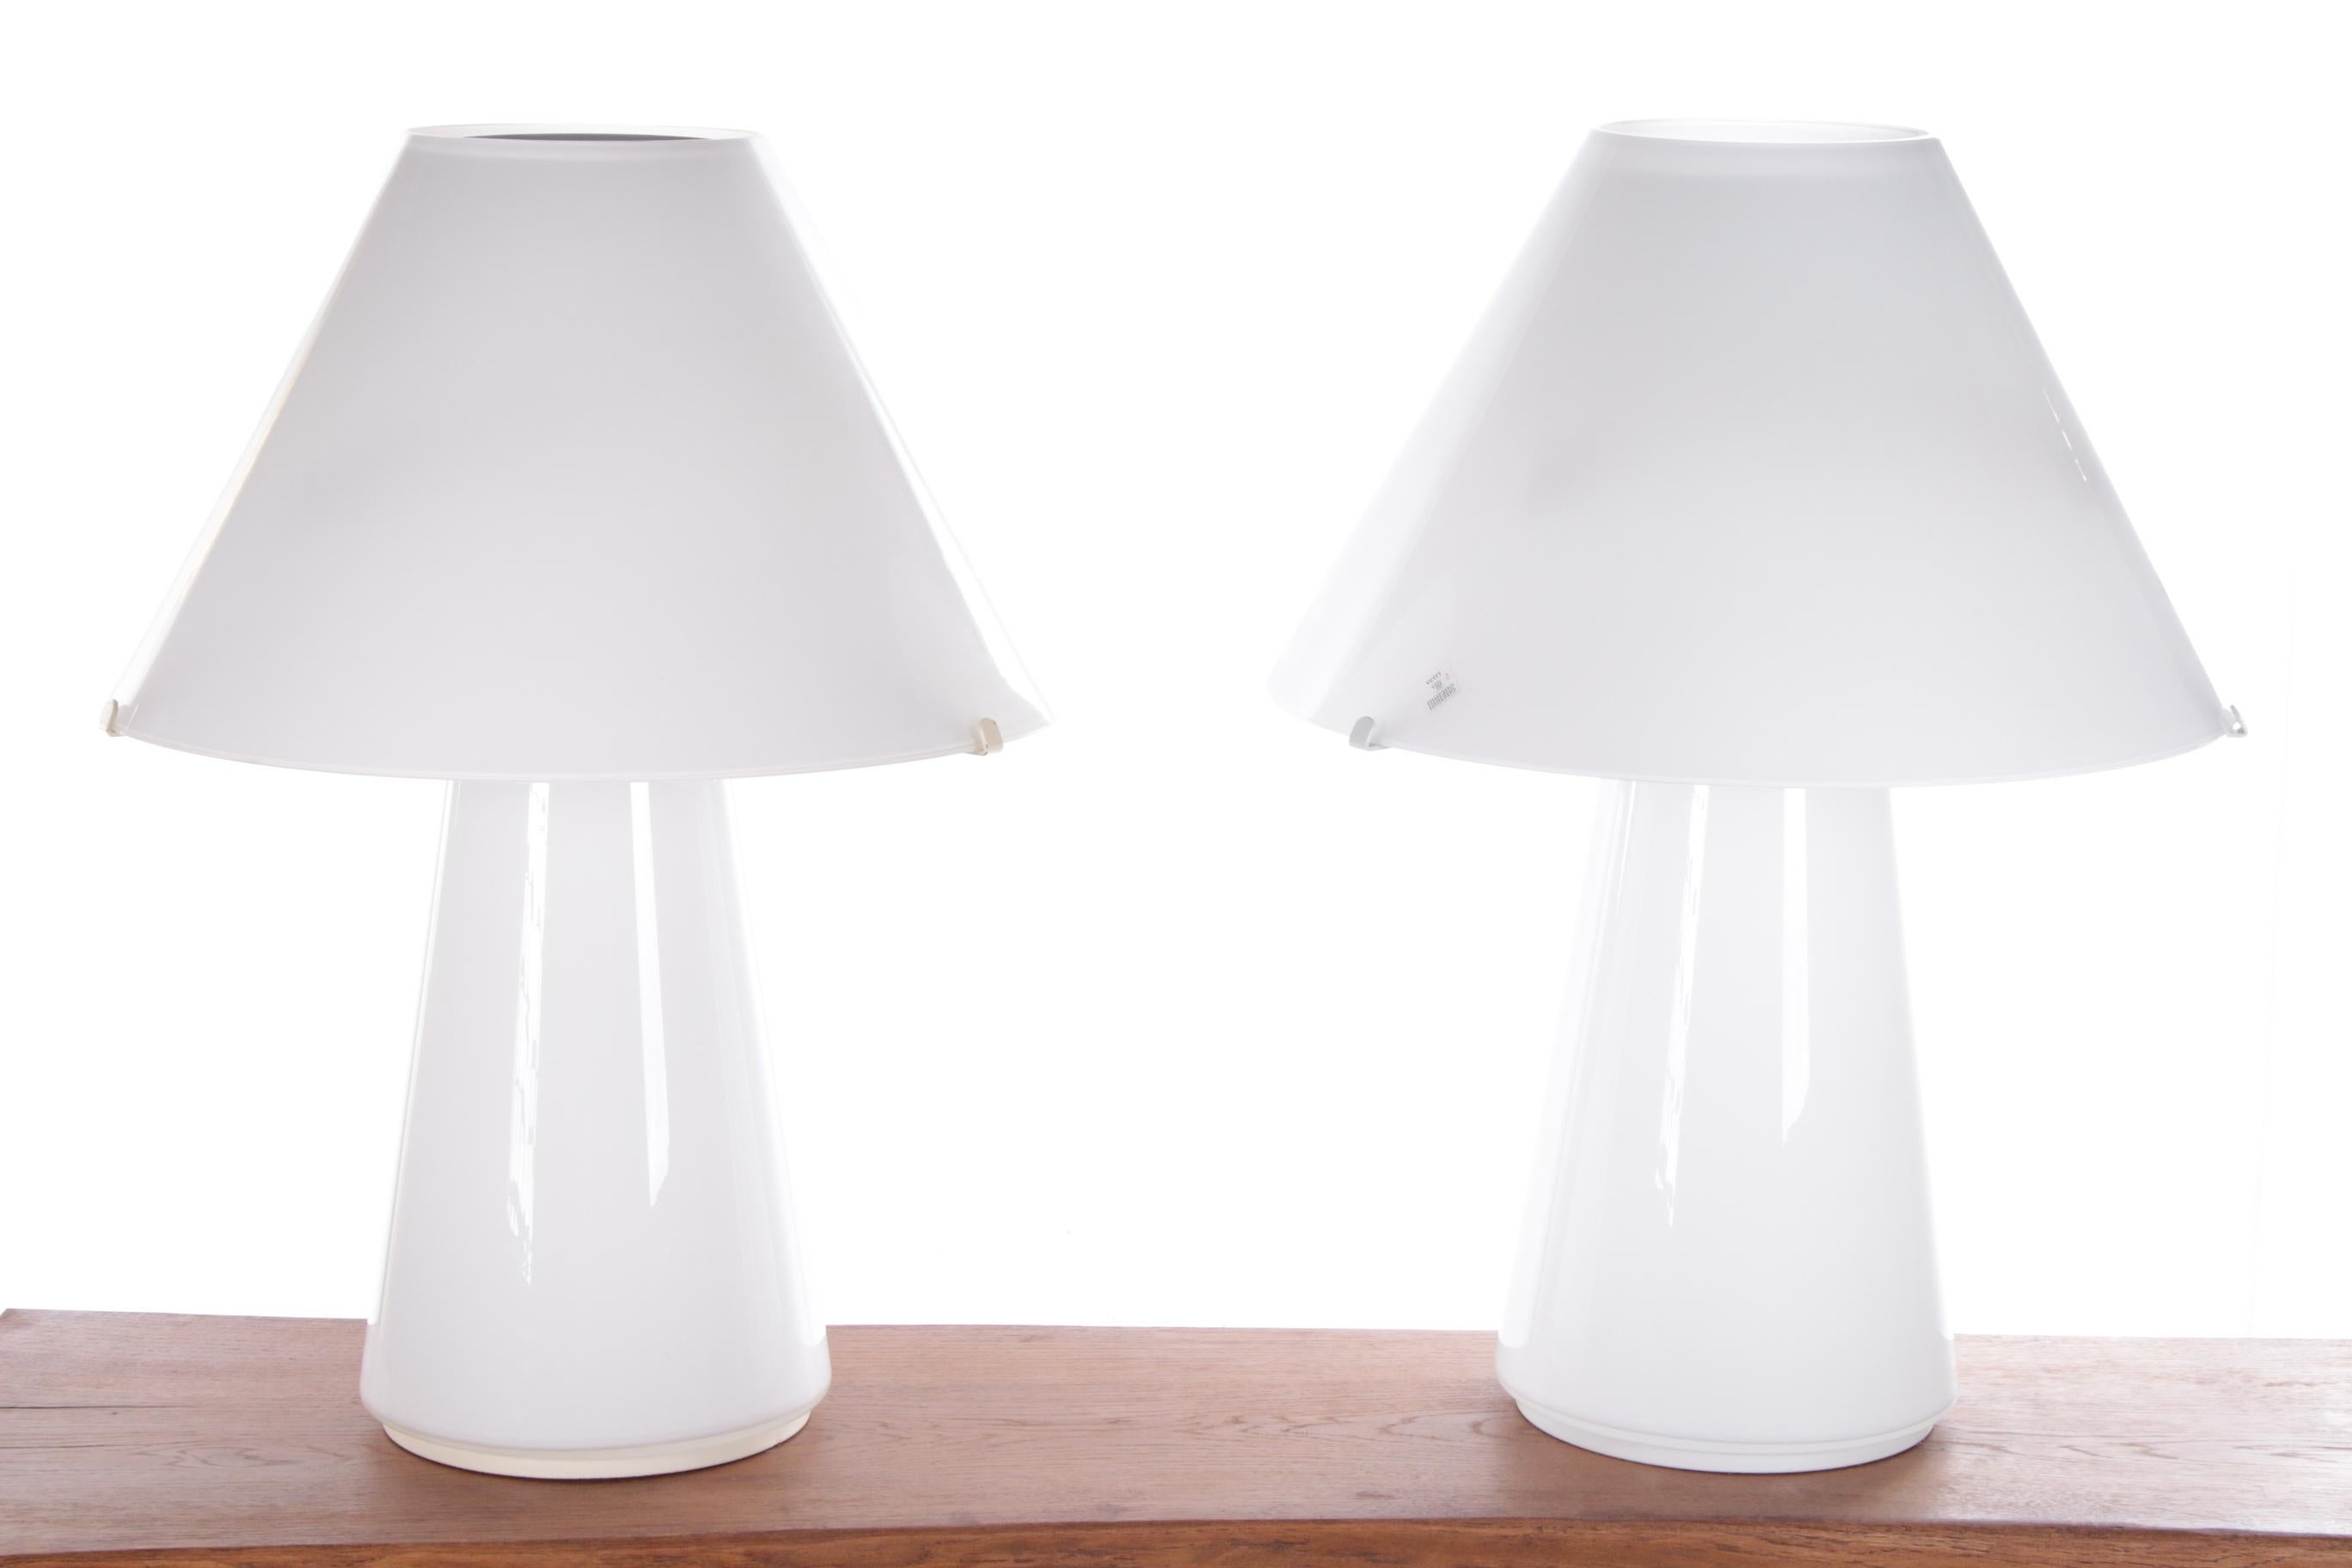 This beautiful set of Murano Mushroom lamps are original, designed and made by Gianni Seguso in 1970.

This elegant set of lamps is an eye-catcher in the room. Beautiful on a sideboard in the living room.

The designer lamps are in perfect